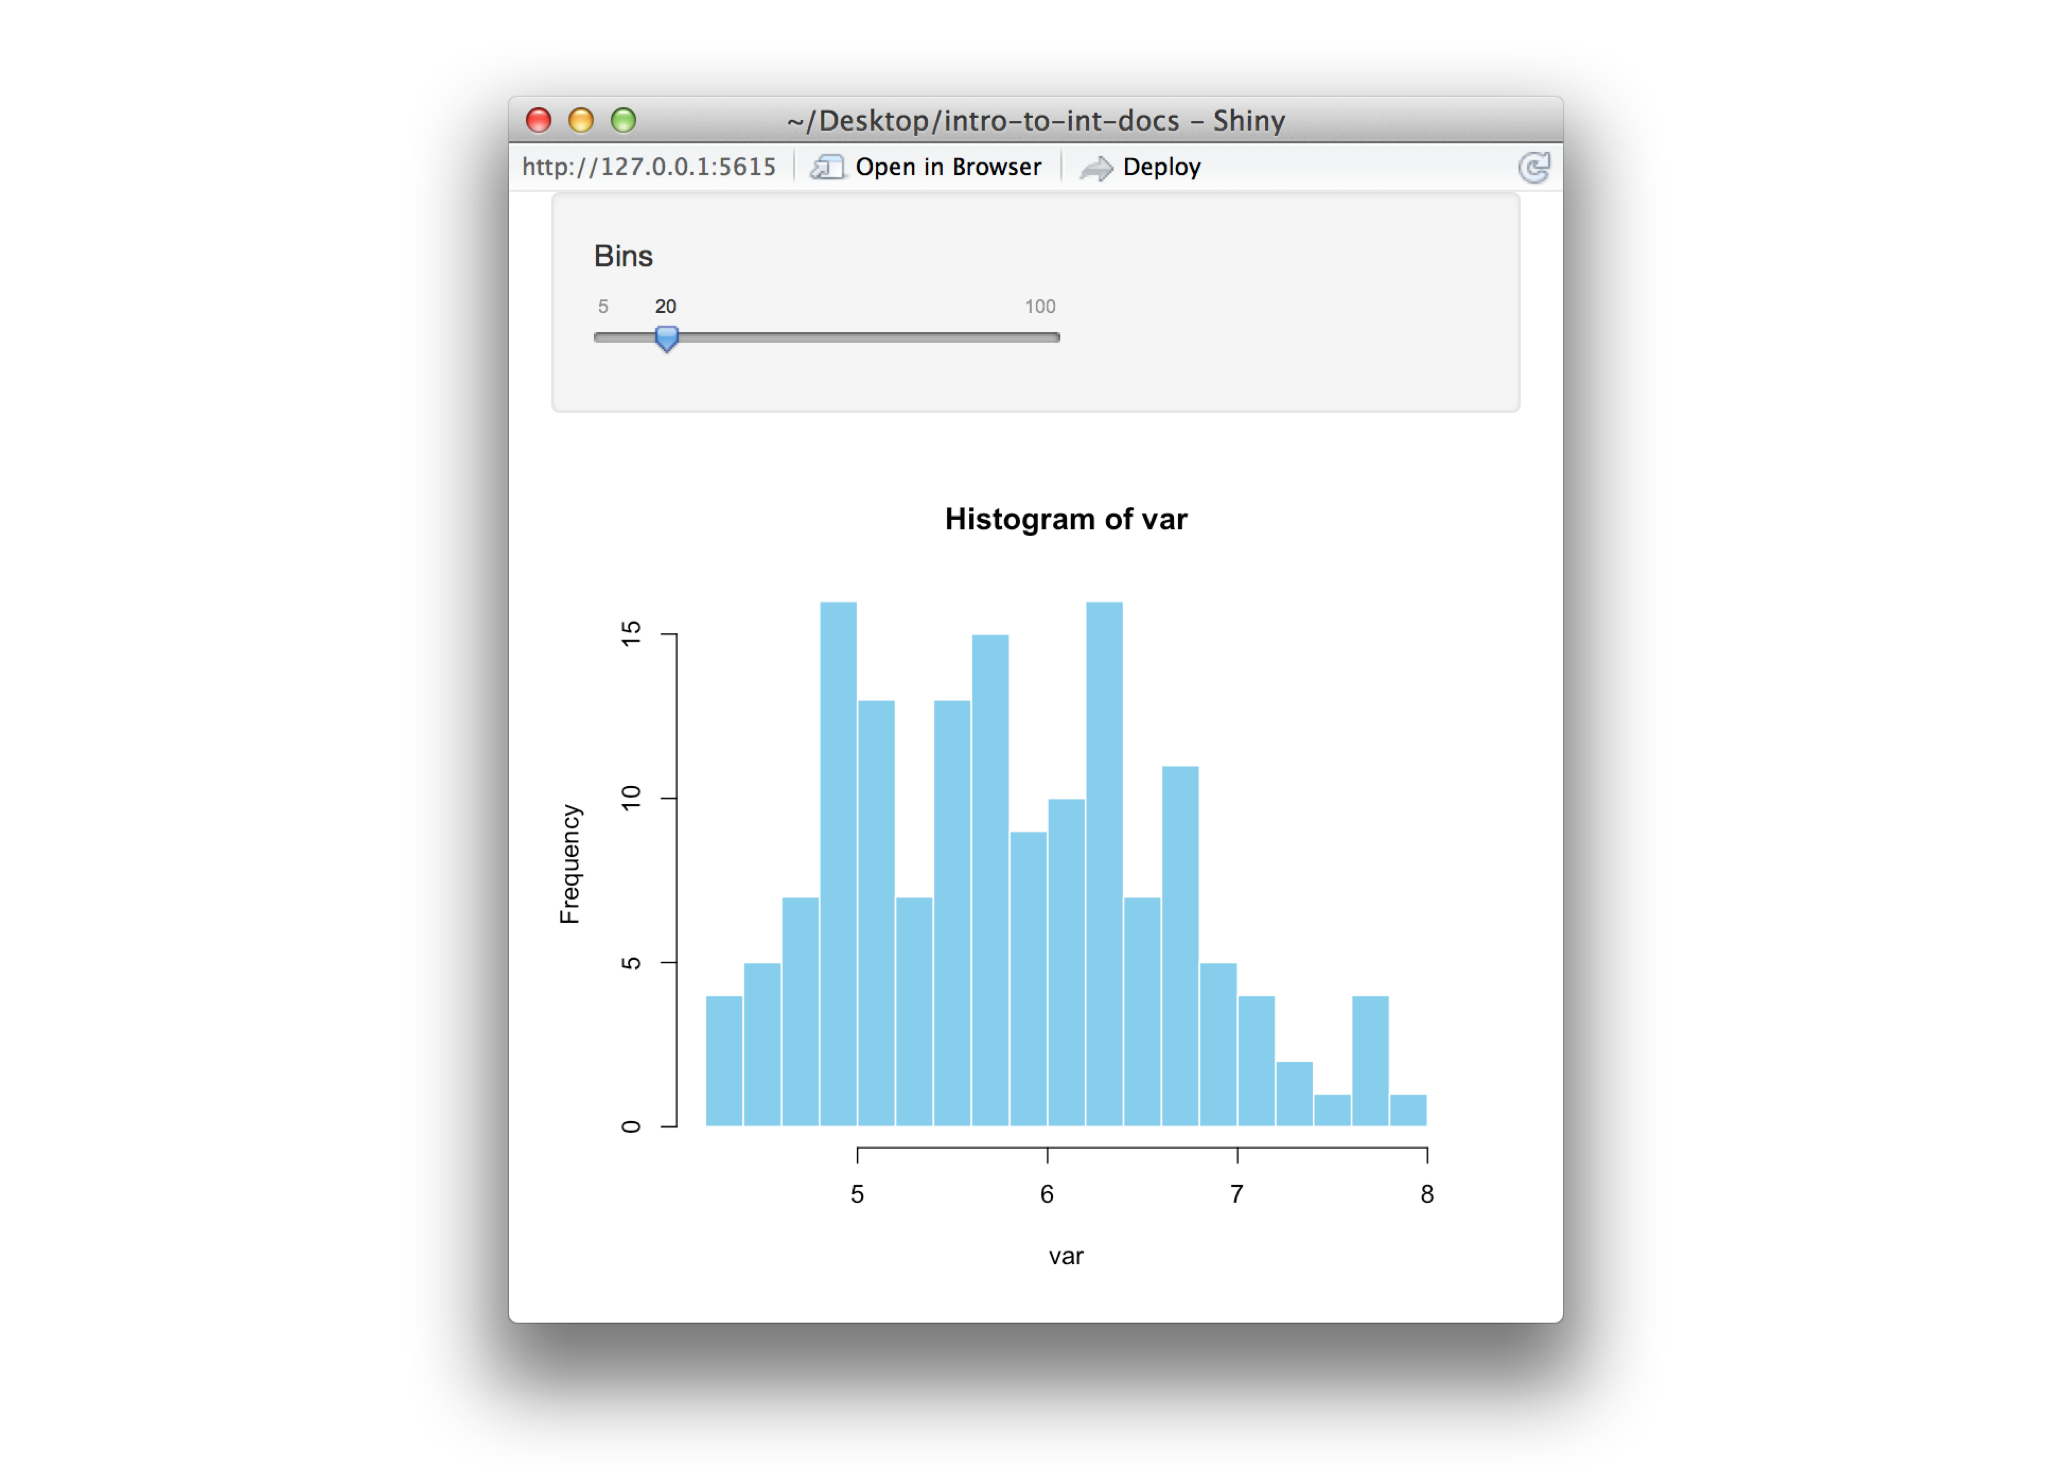 Shiny app with slider bar of bins and histogram of vars for iris data